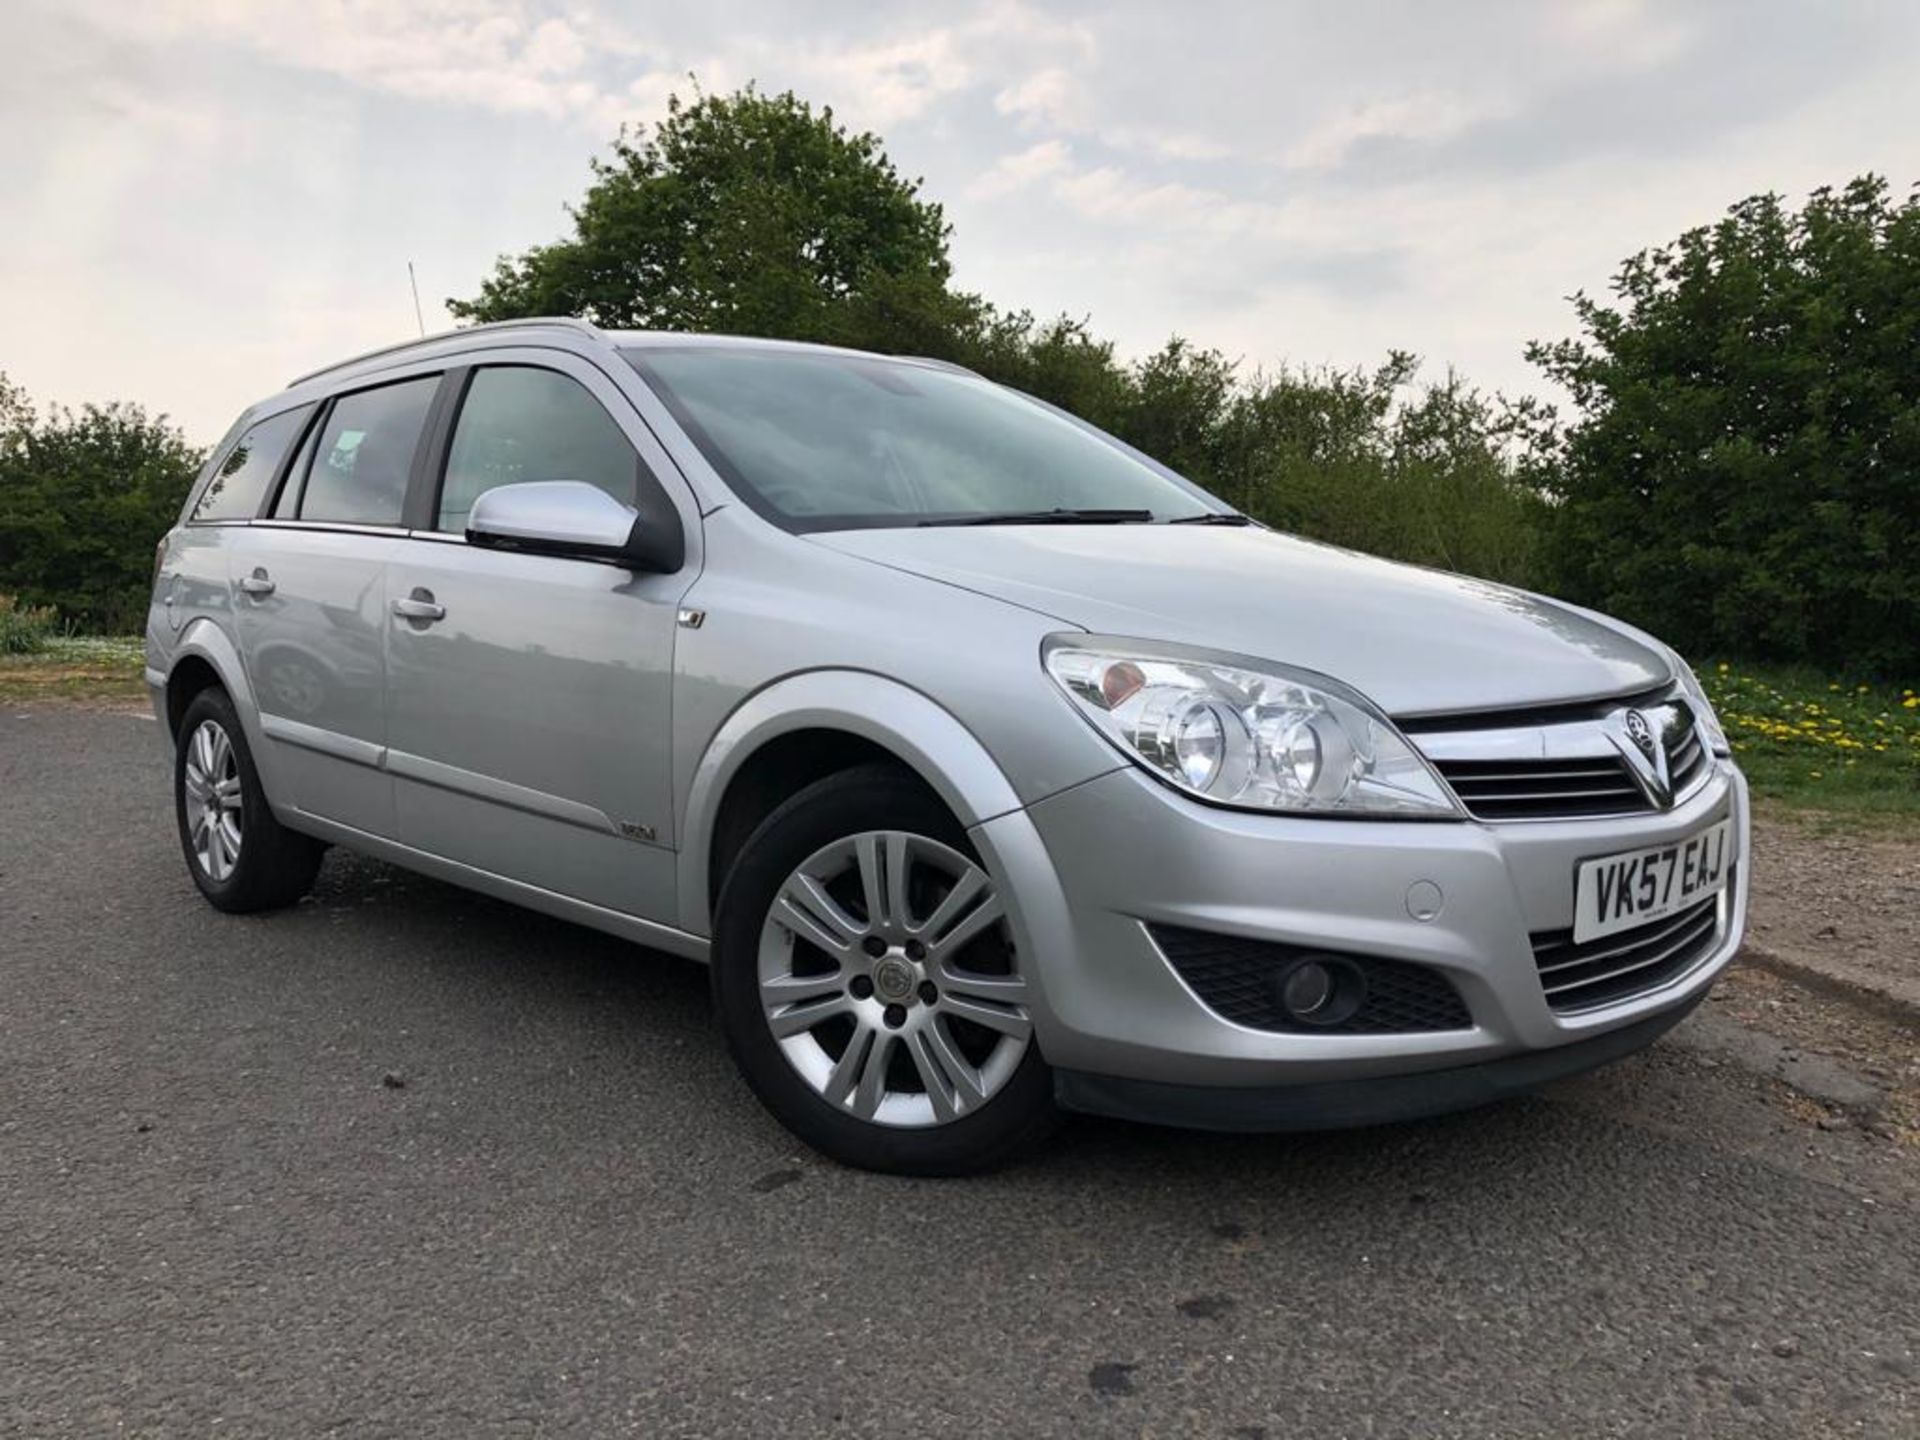 2007/57 REG VAUXHALL ASTRA DESIGN CDTI 100 1.7 DIESEL ESTATE SILVER, SHOWING 2 FORMER KEEPERS